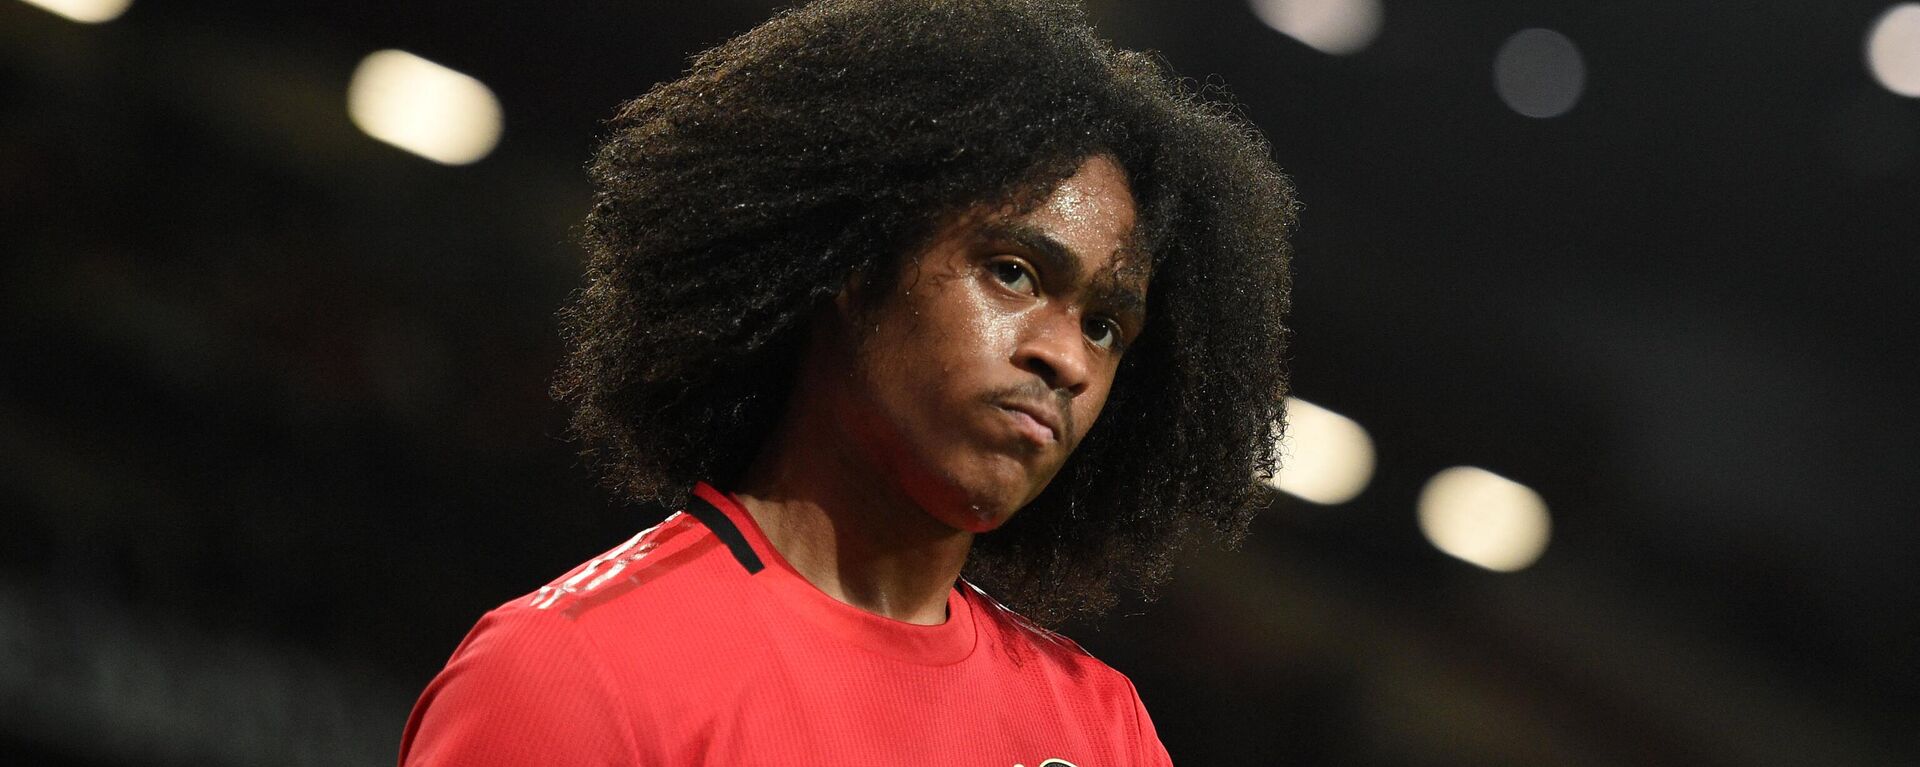 Manchester United's Dutch midfielder Tahith Chong leaves the field during the UEFA Europa League Group L football match between Manchester United and Astana at Old Trafford in Manchester, north west England, on 19 September, 2019. - Sputnik International, 1920, 27.03.2022